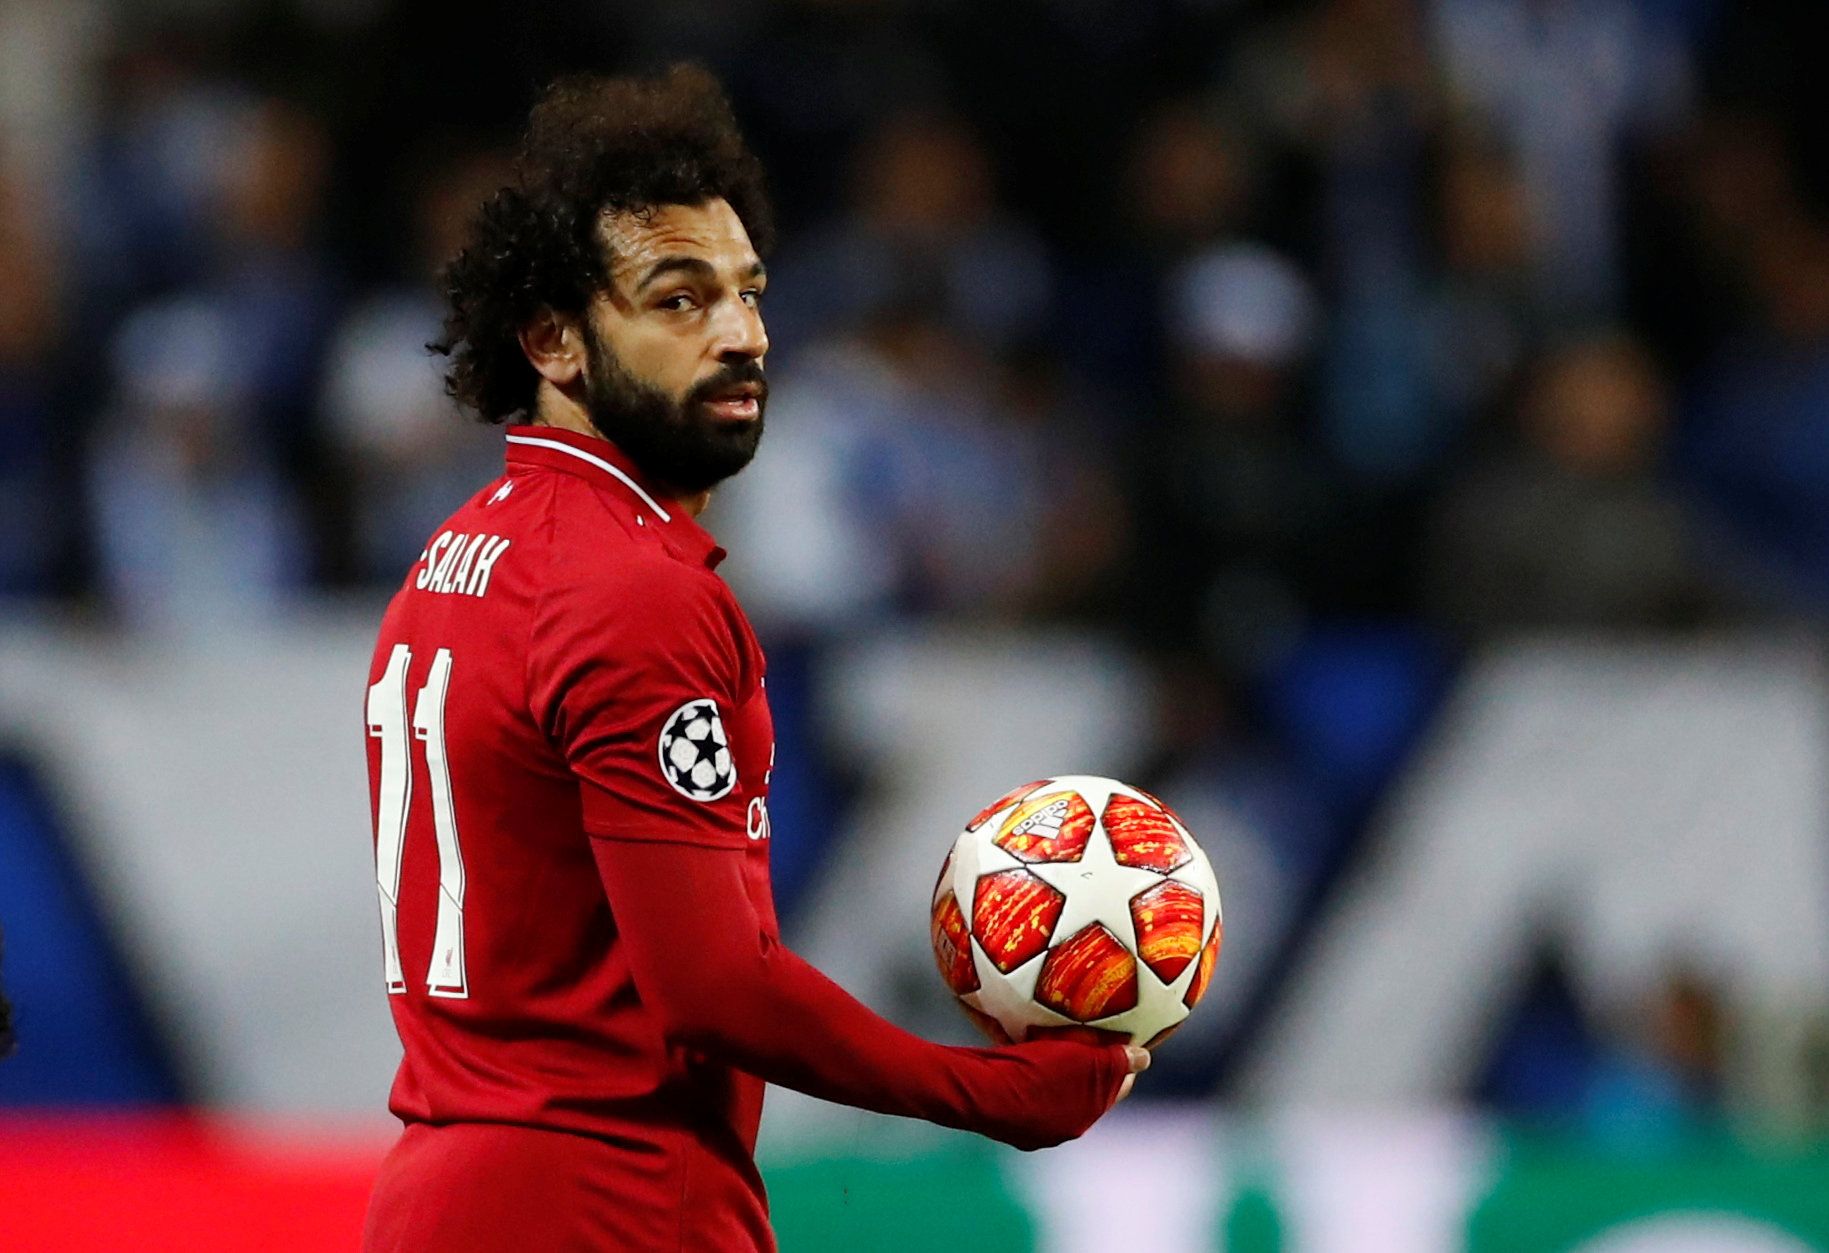 Soccer Football - Champions League Quarter Final Second Leg - FC Porto v Liverpool - Estadio do Dragao, Porto, Portugal - April 17, 2019  Liverpool's Mohamed Salah with the match ball              Action Images via Reuters/Andrew Boyers